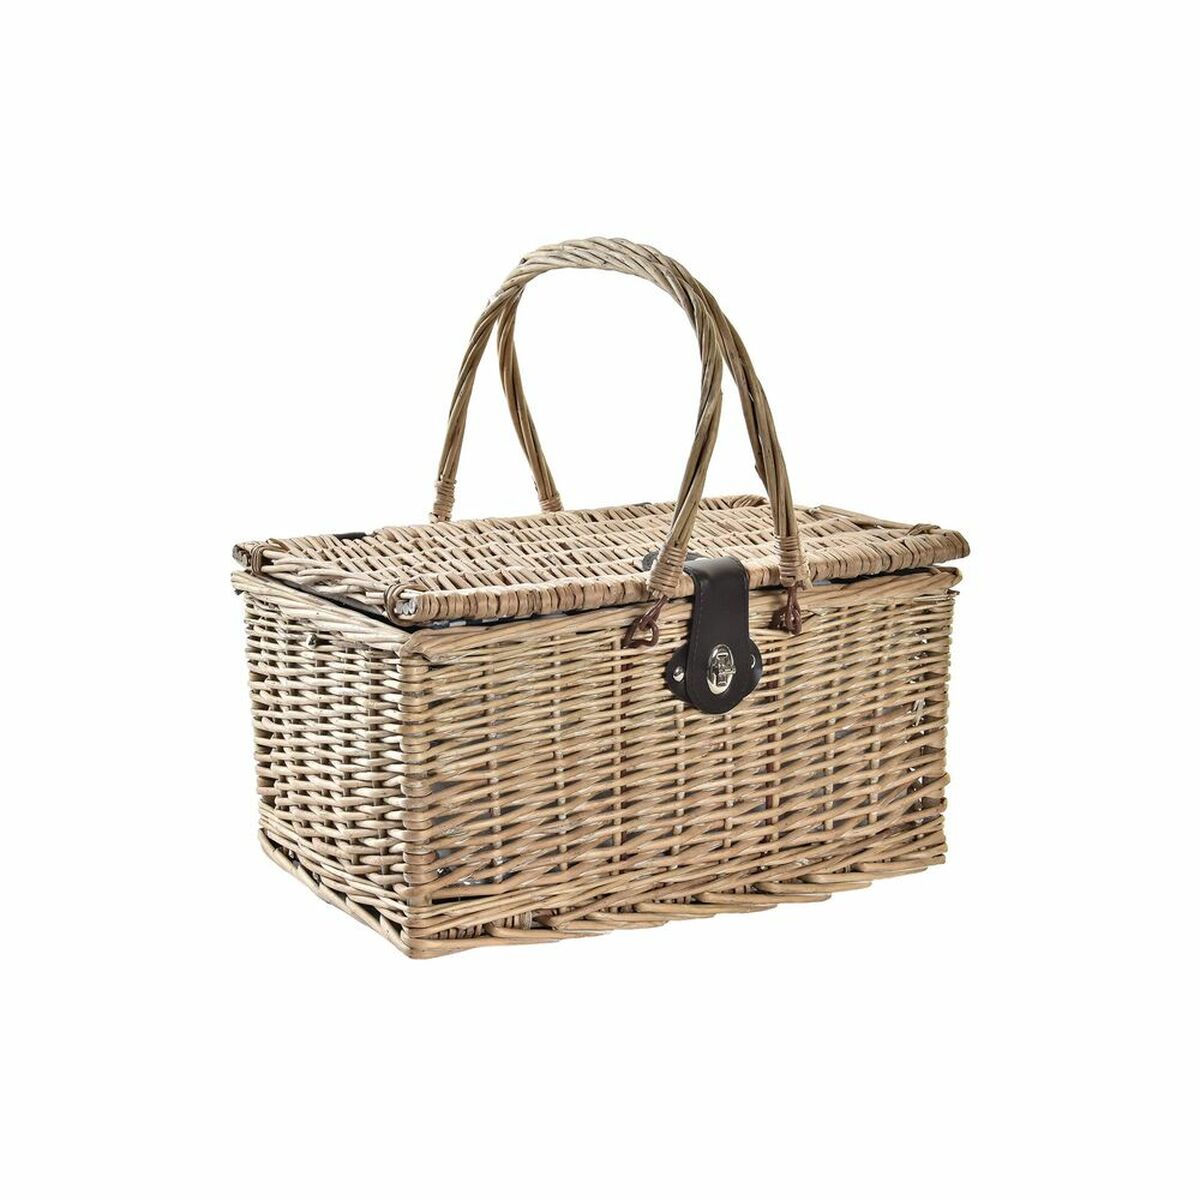 Basket DKD Home Decor wicker Picnic Ceramic Natural Blue Polyester Stainless steel (41 x 33 x 23 cm)